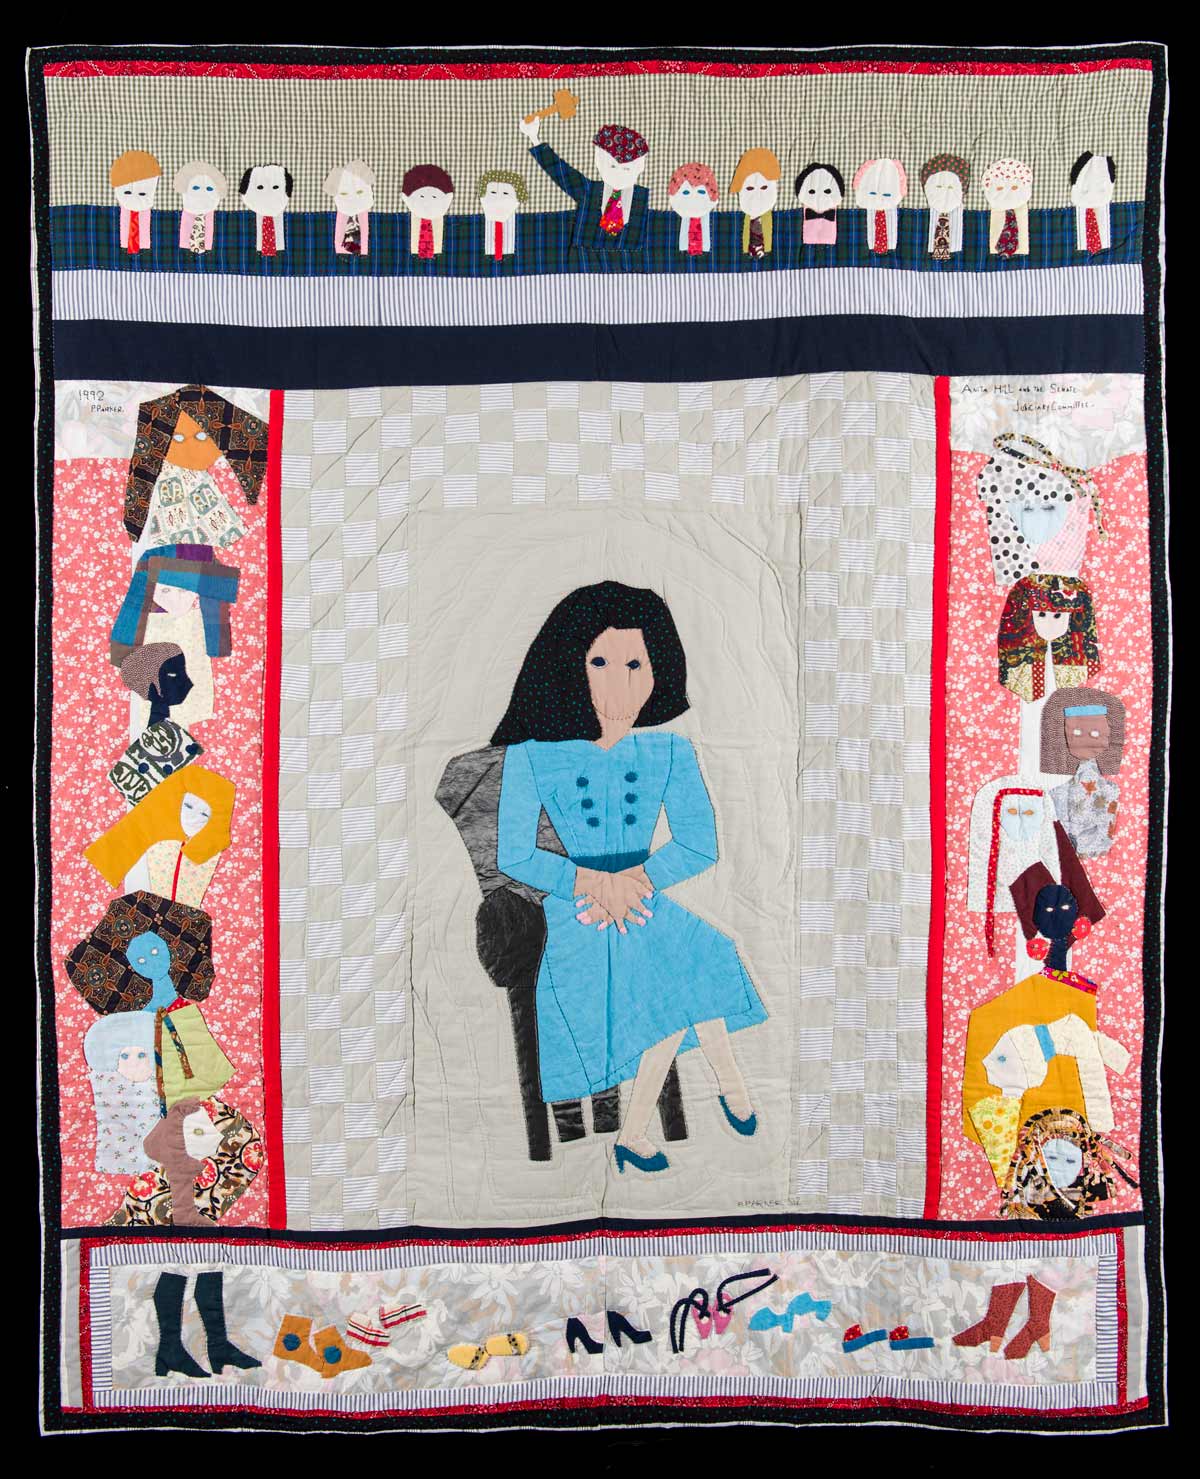 Quilt of a woman sitting in a chair in the middle with different people along the outside as an audience